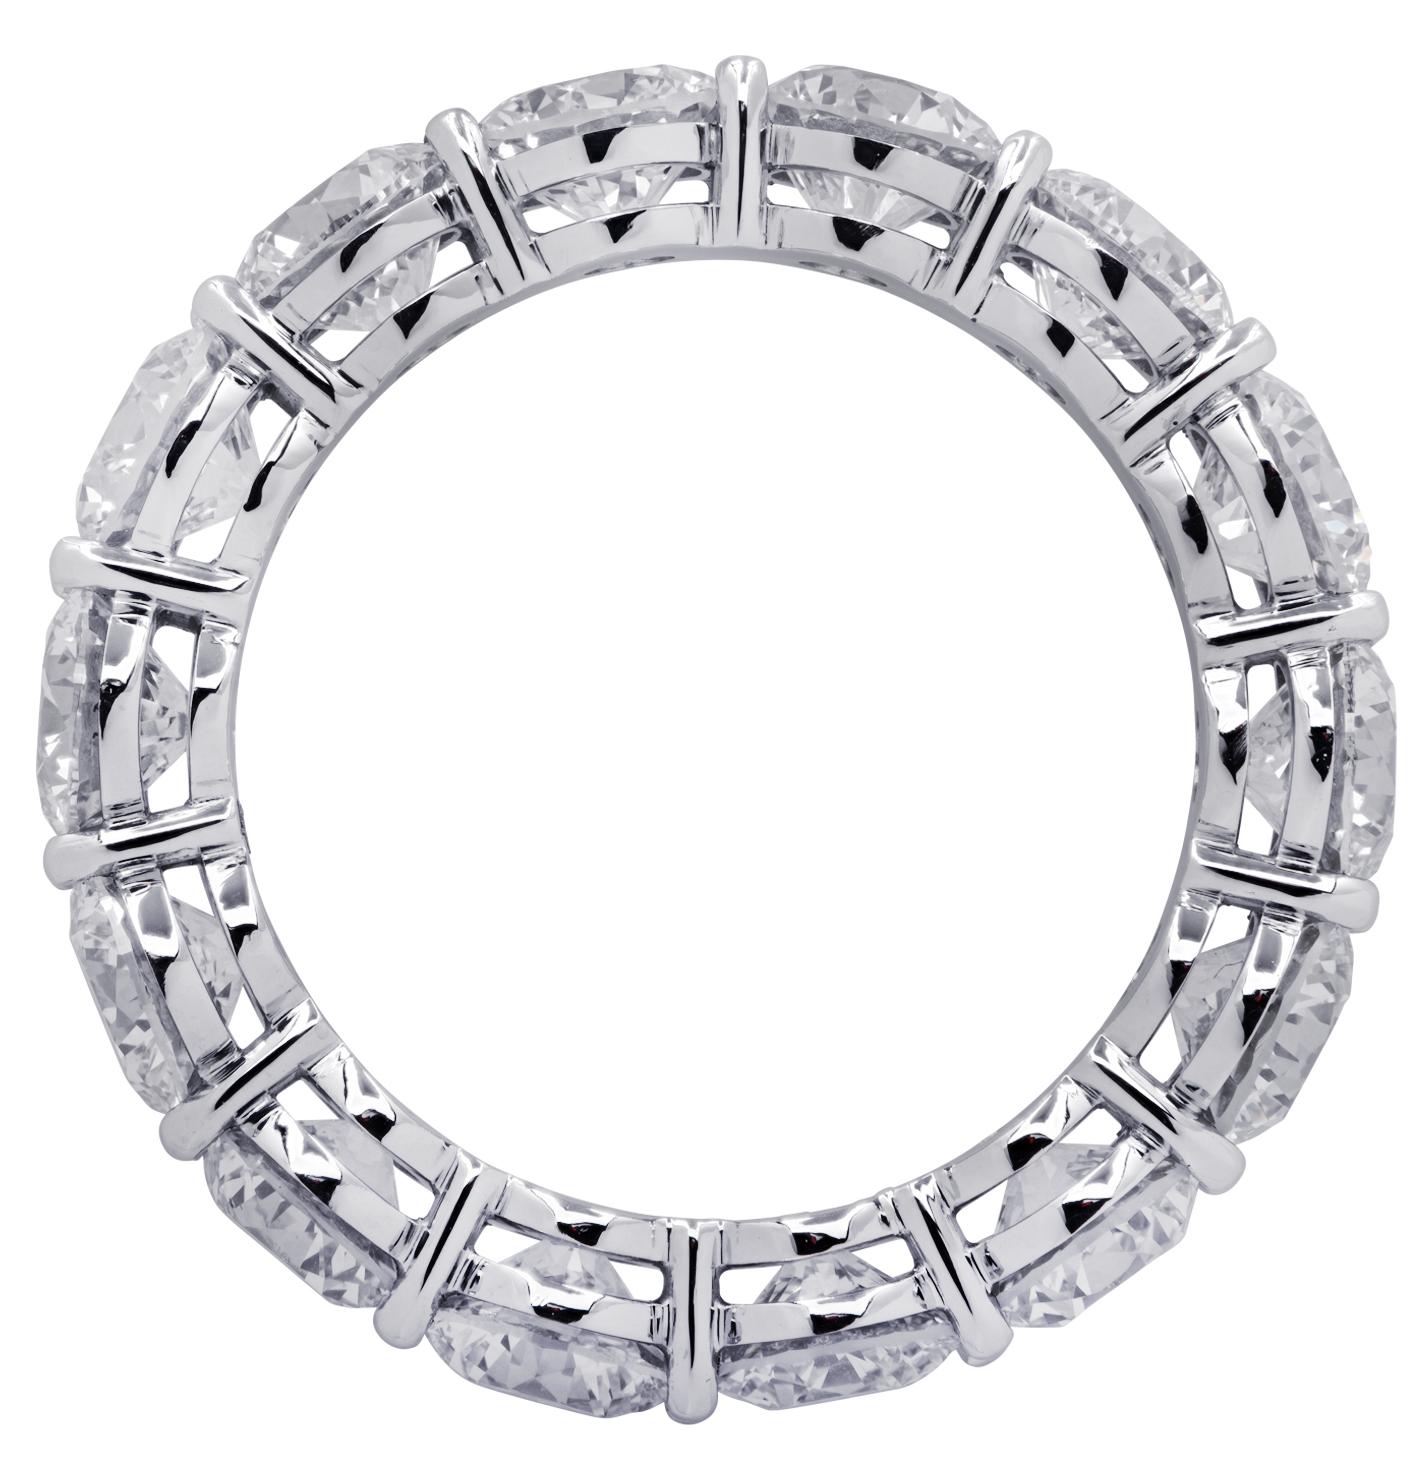 Exquisite Vivid Diamonds eternity band crafted in Platinum, showcasing 14 stunning GIA certified round brilliant cut diamonds weighing 5.62 carats total, D-F color, VVS-VS clarity. Each diamond was carefully selected, perfectly matched and set in a